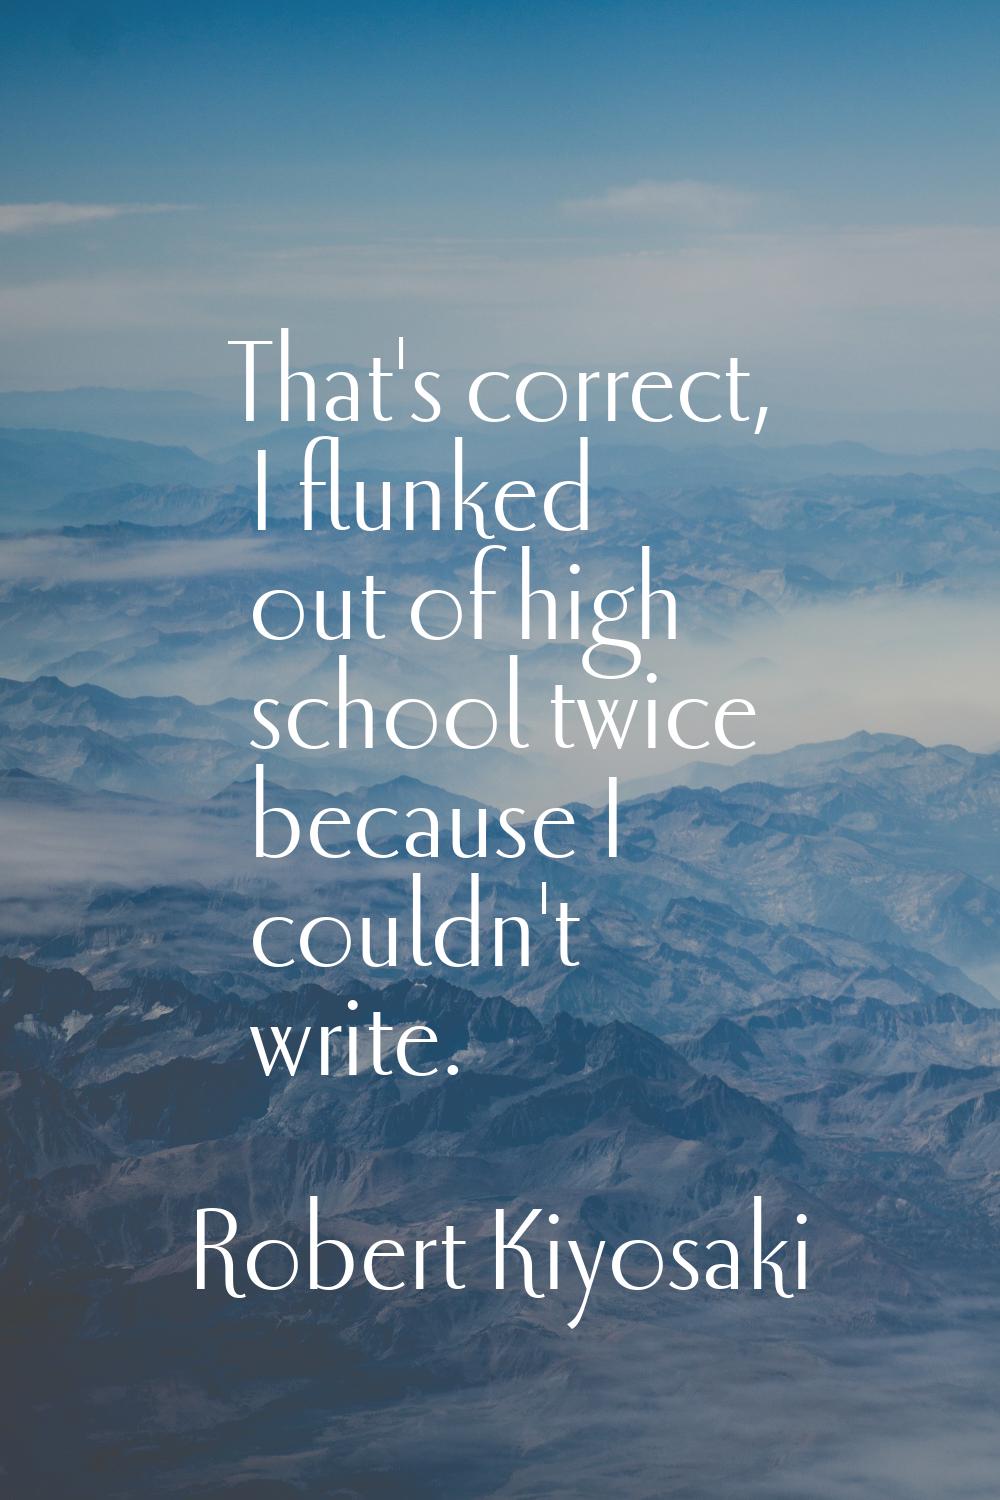 That's correct, I flunked out of high school twice because I couldn't write.